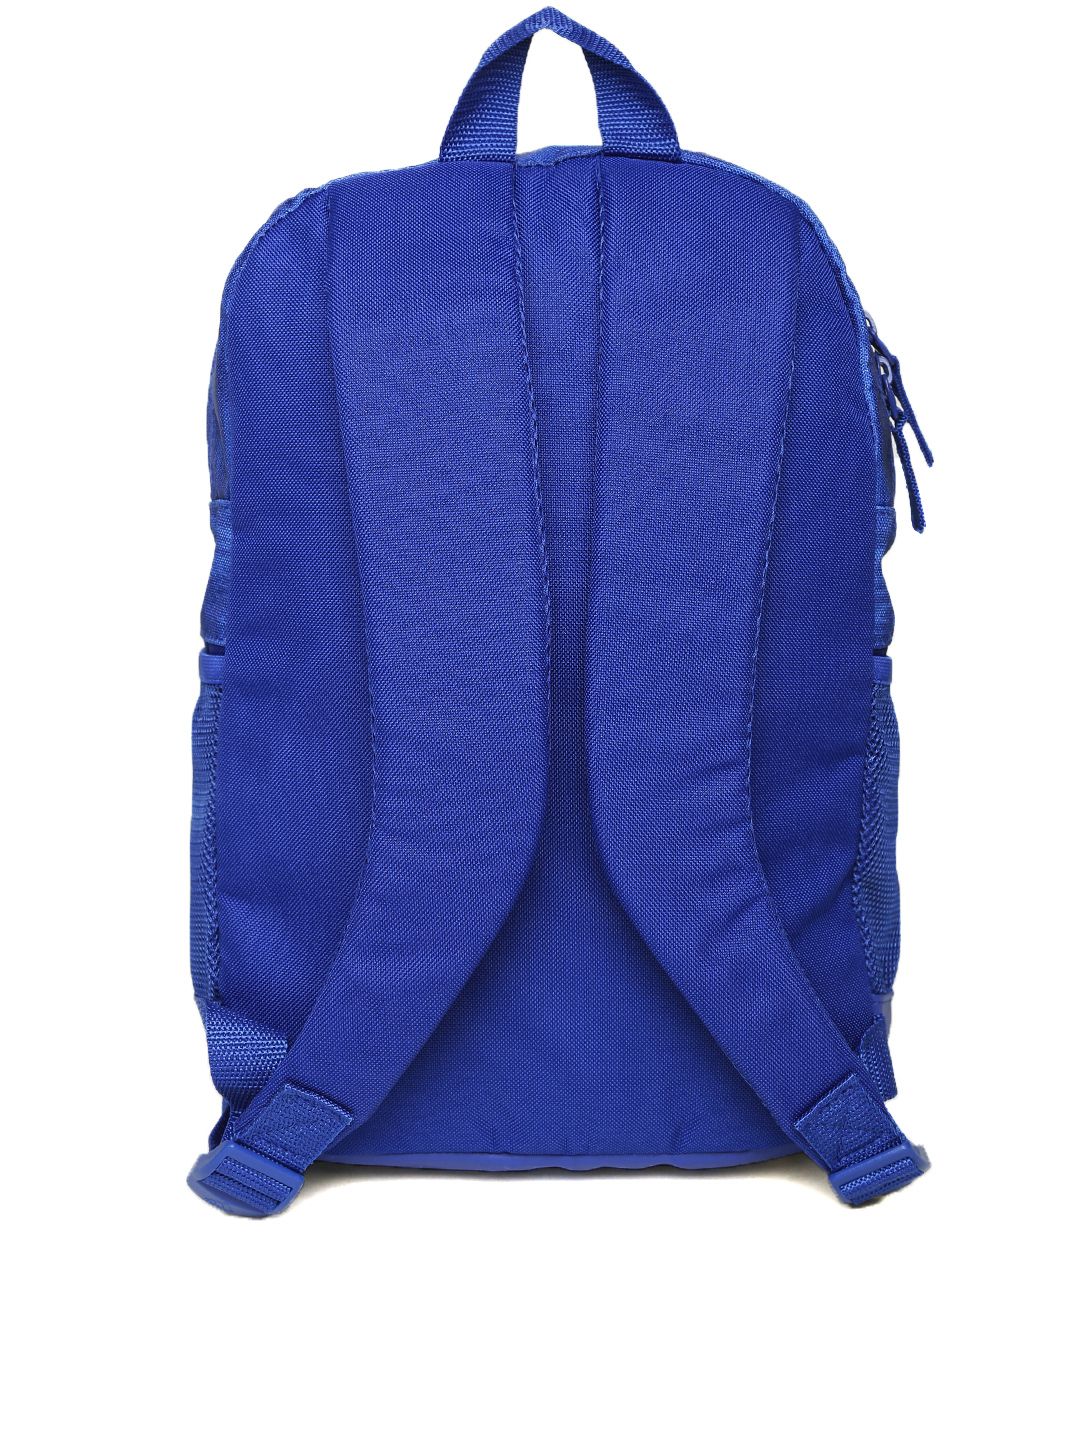 purple adidas backpack promo code for 